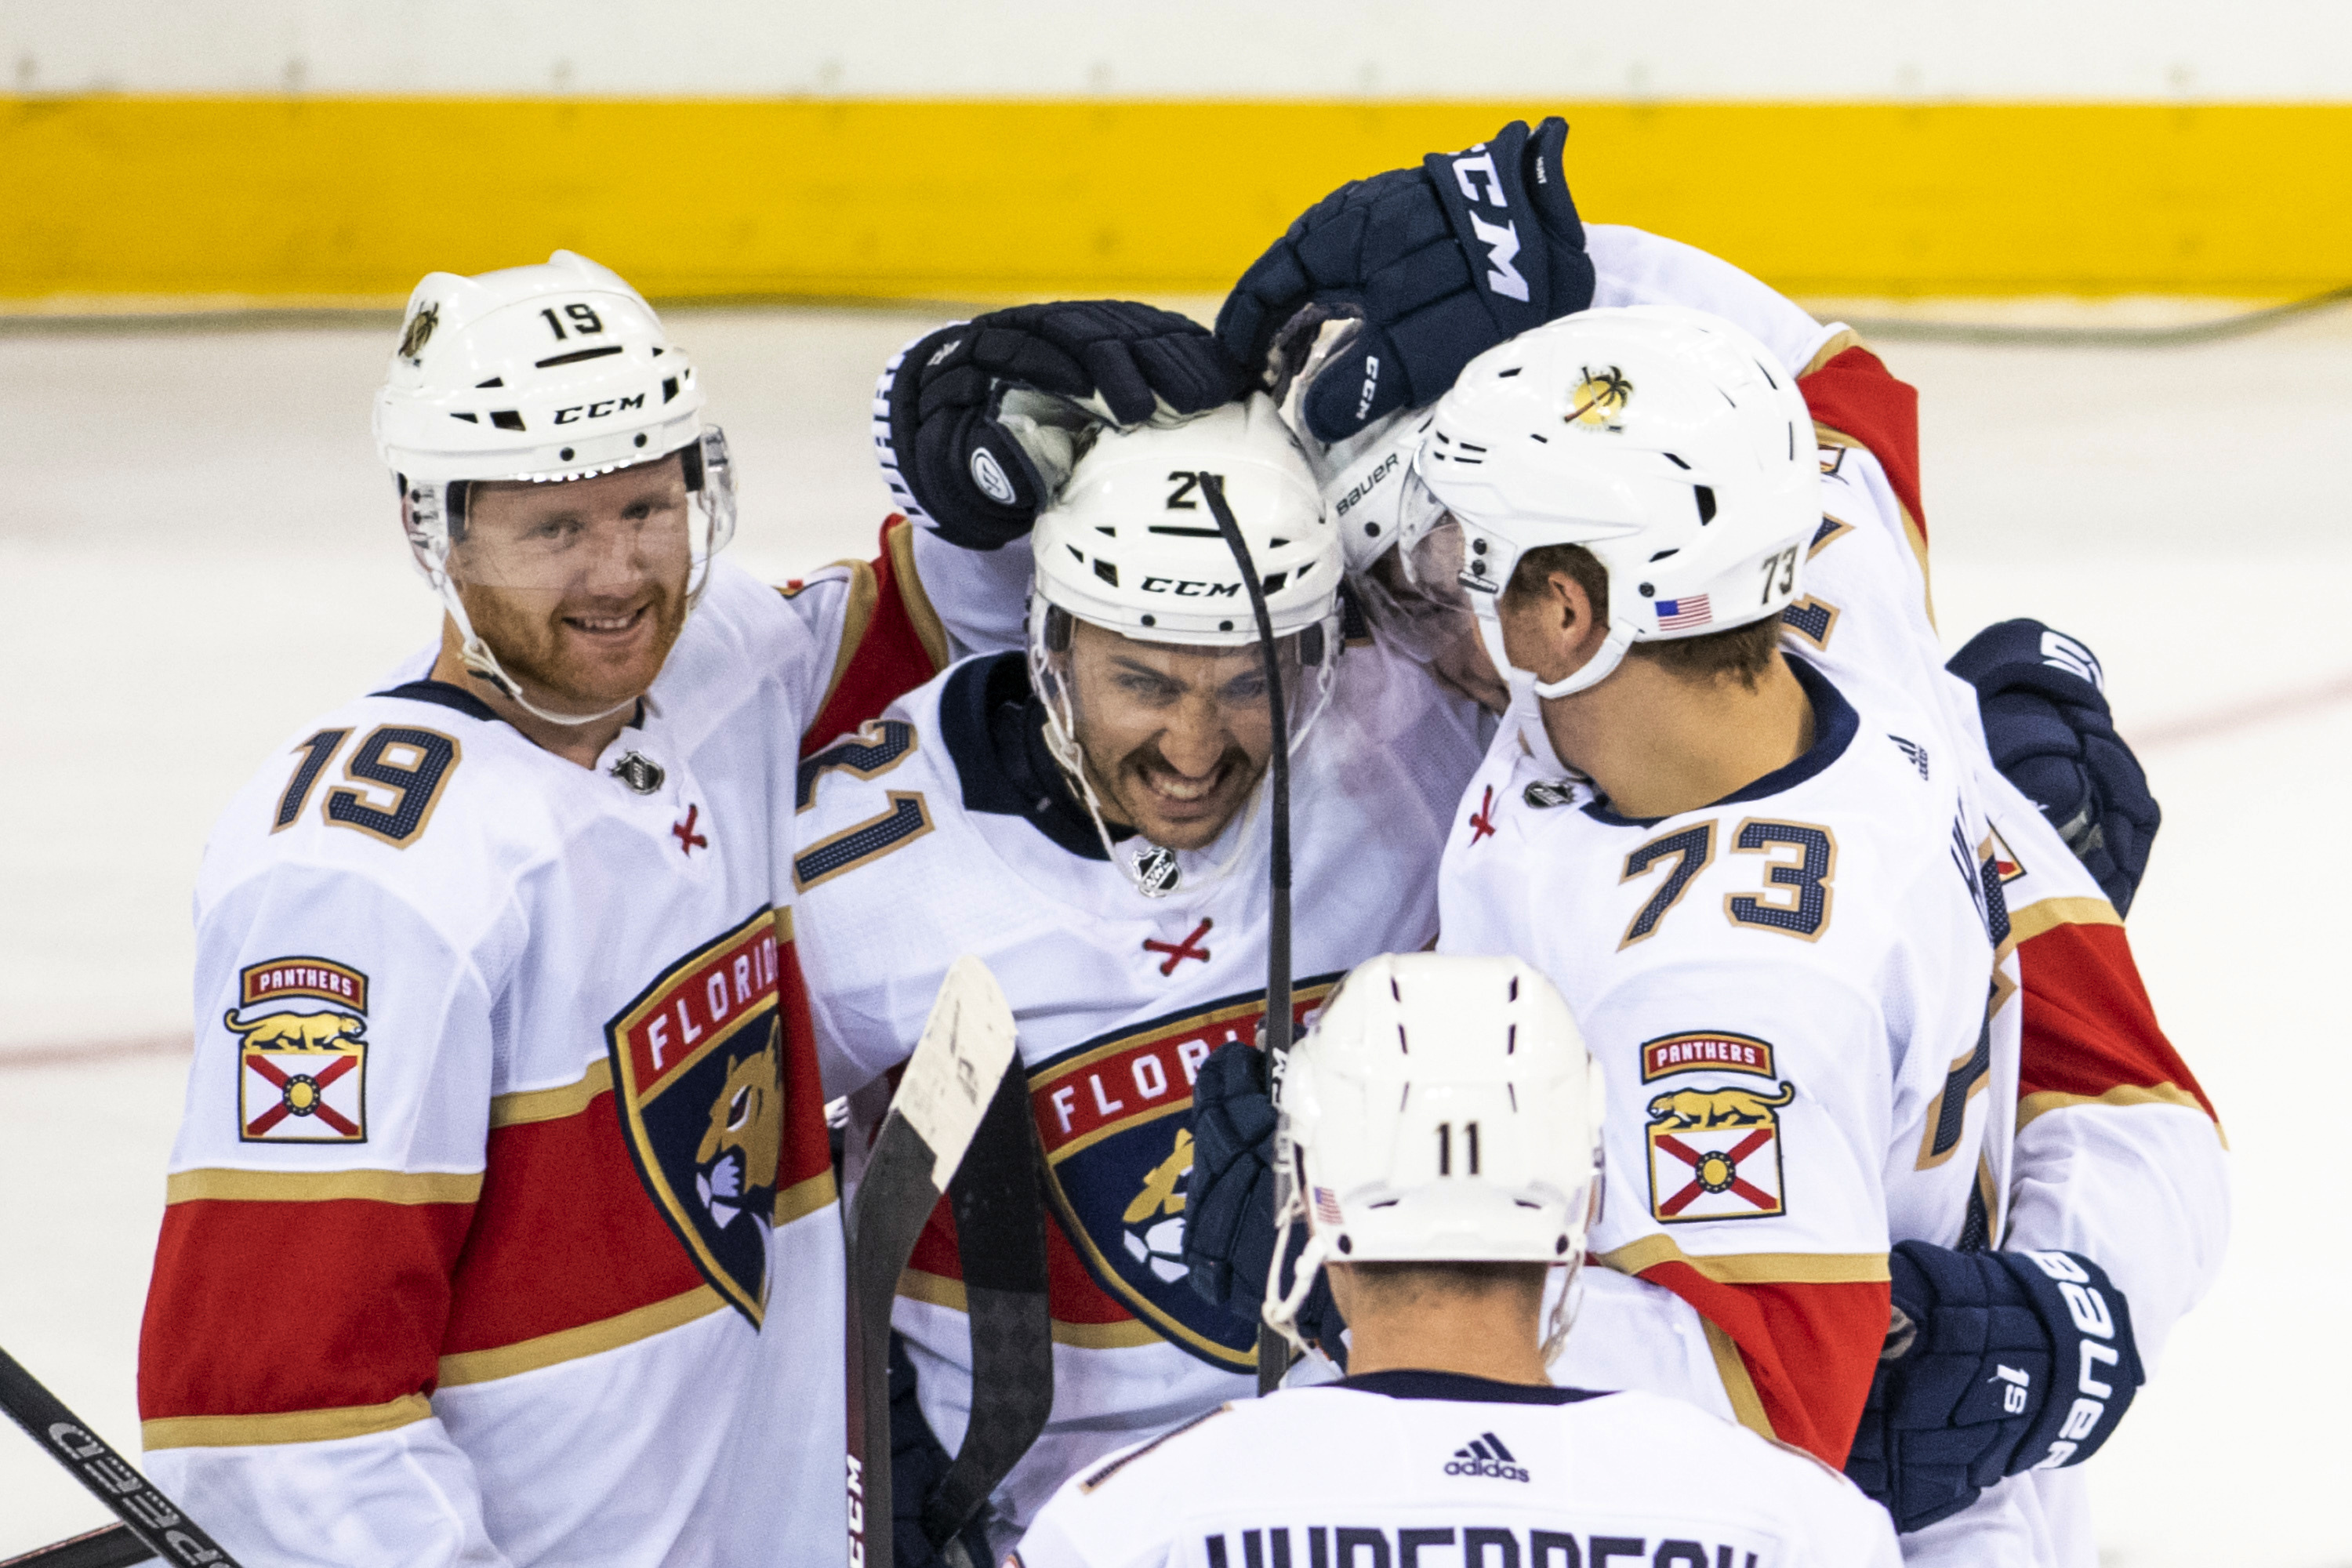 Trocheck helps Panthers outlast Rangers in shootout, 6-5